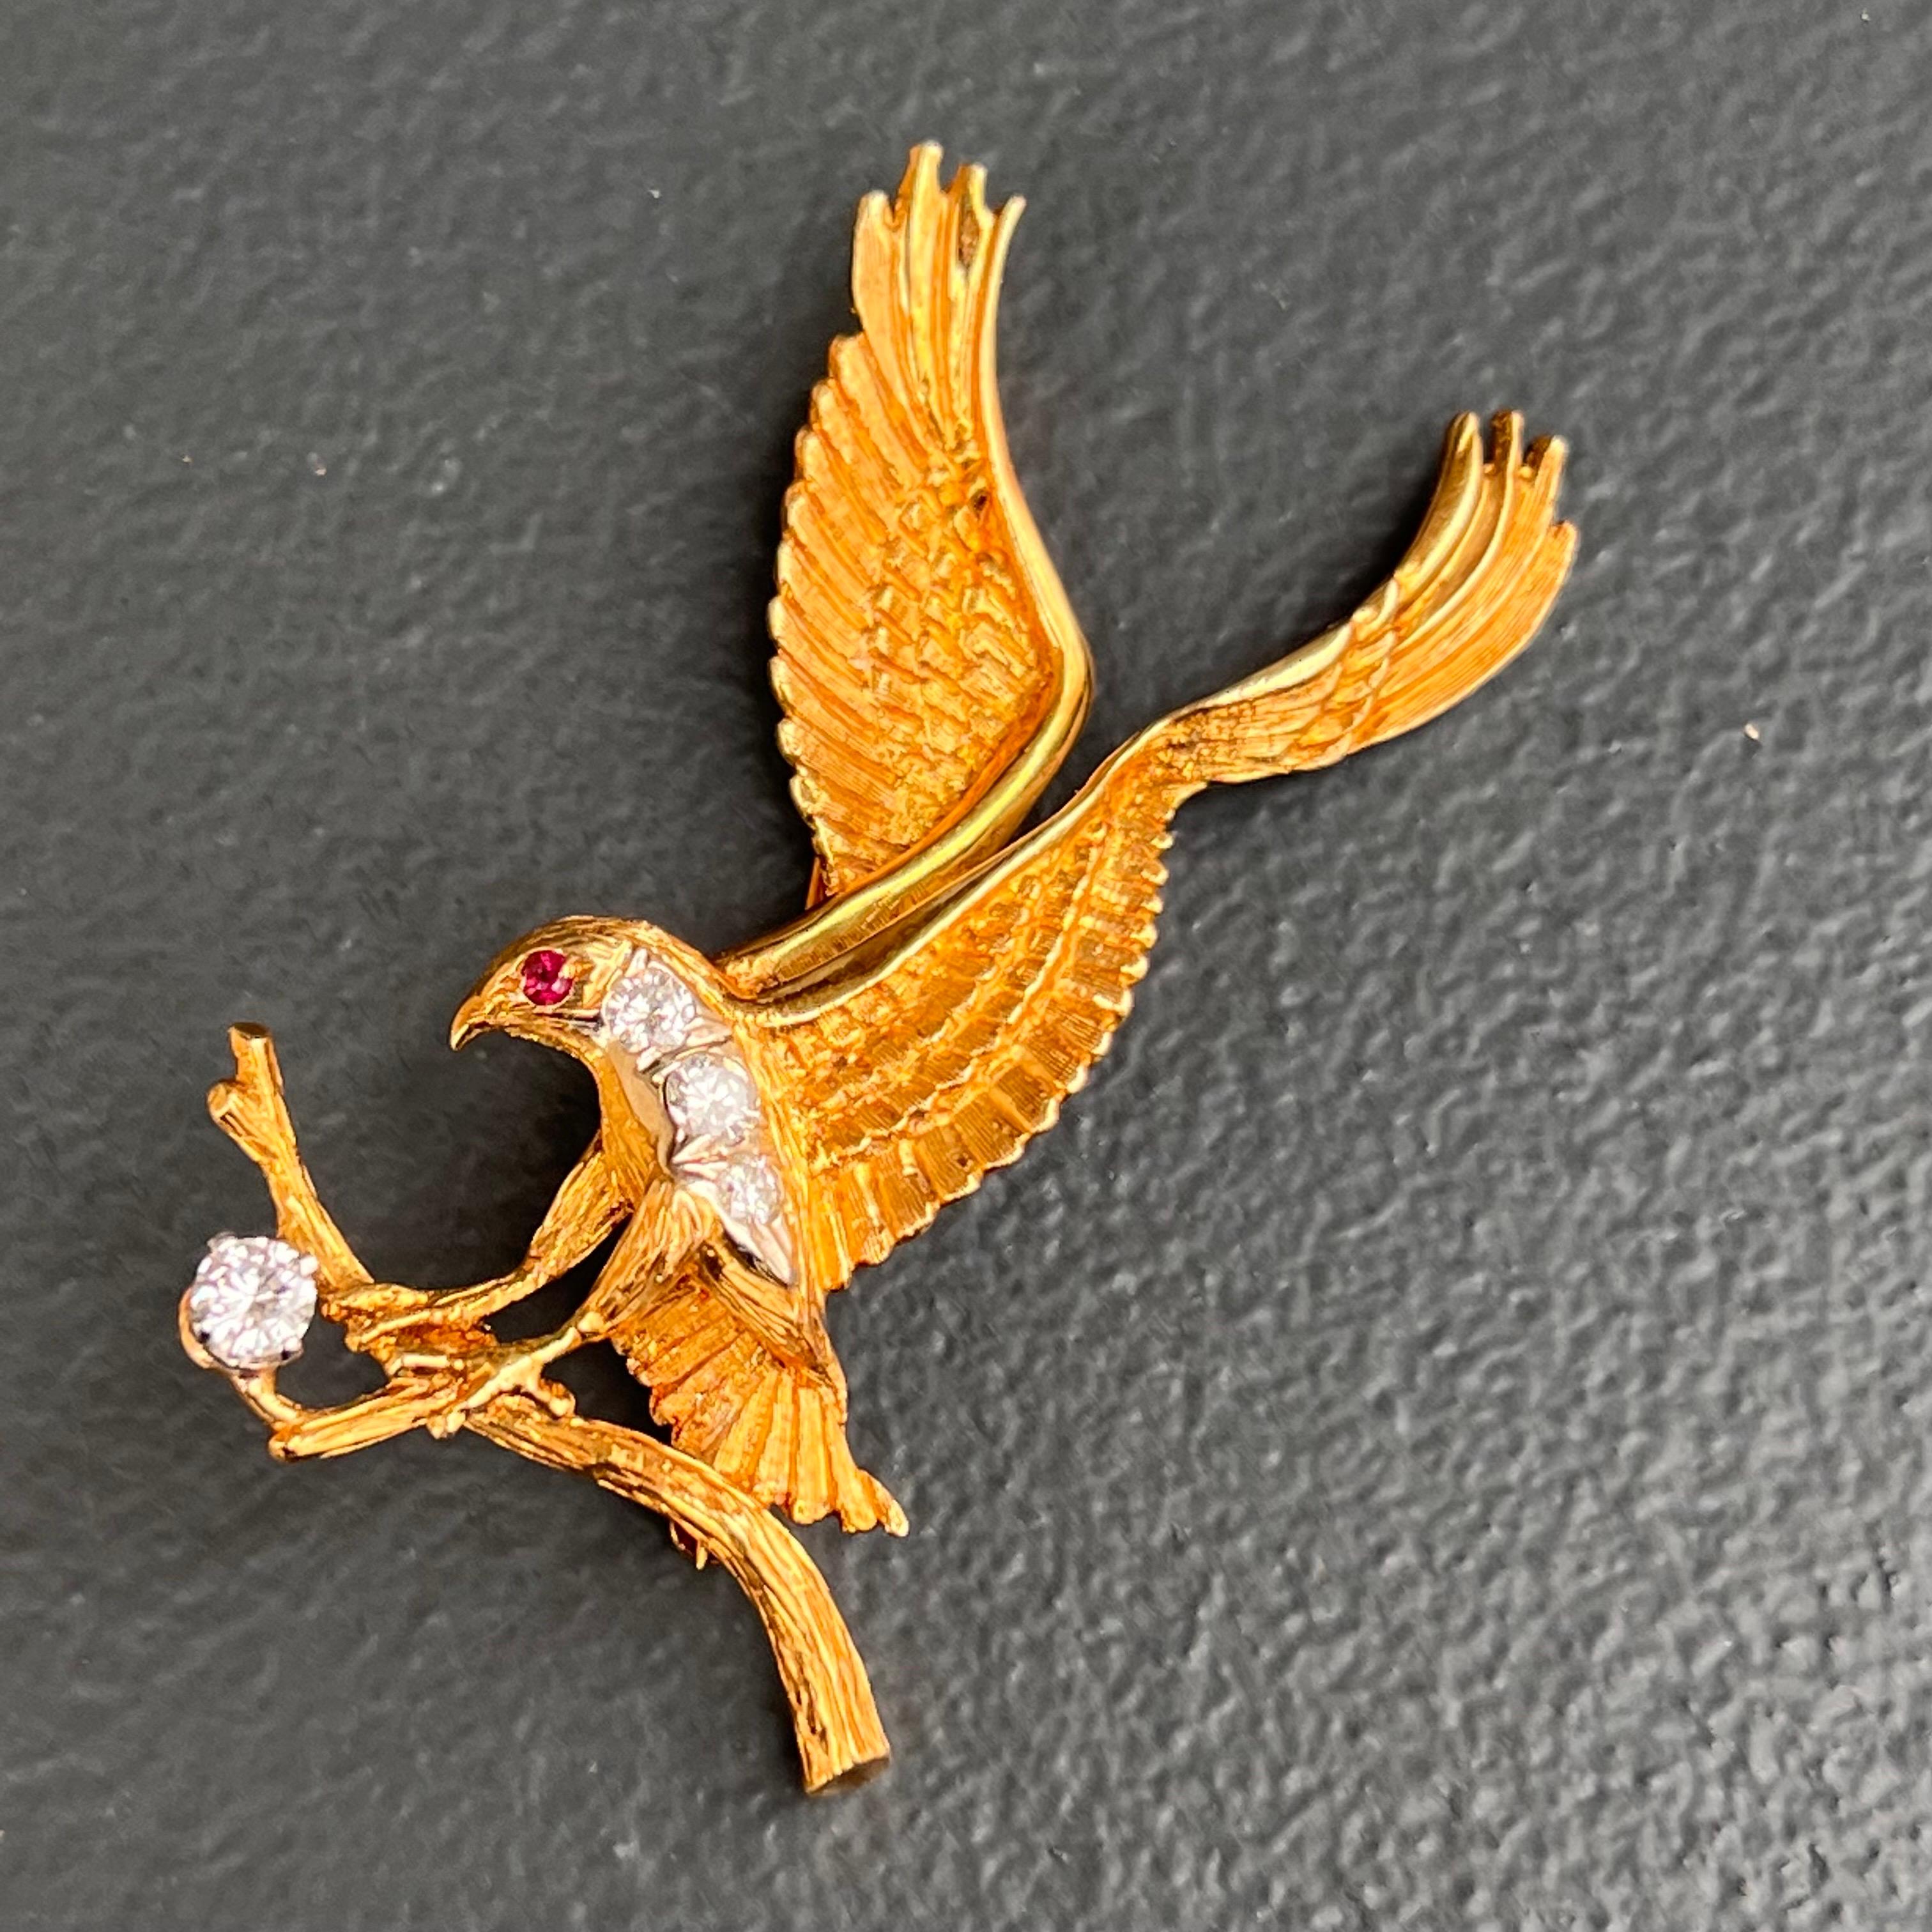 Diamond 18 Karat Gold American Bald Eagle Pin with Ruby Eyes For Sale 4